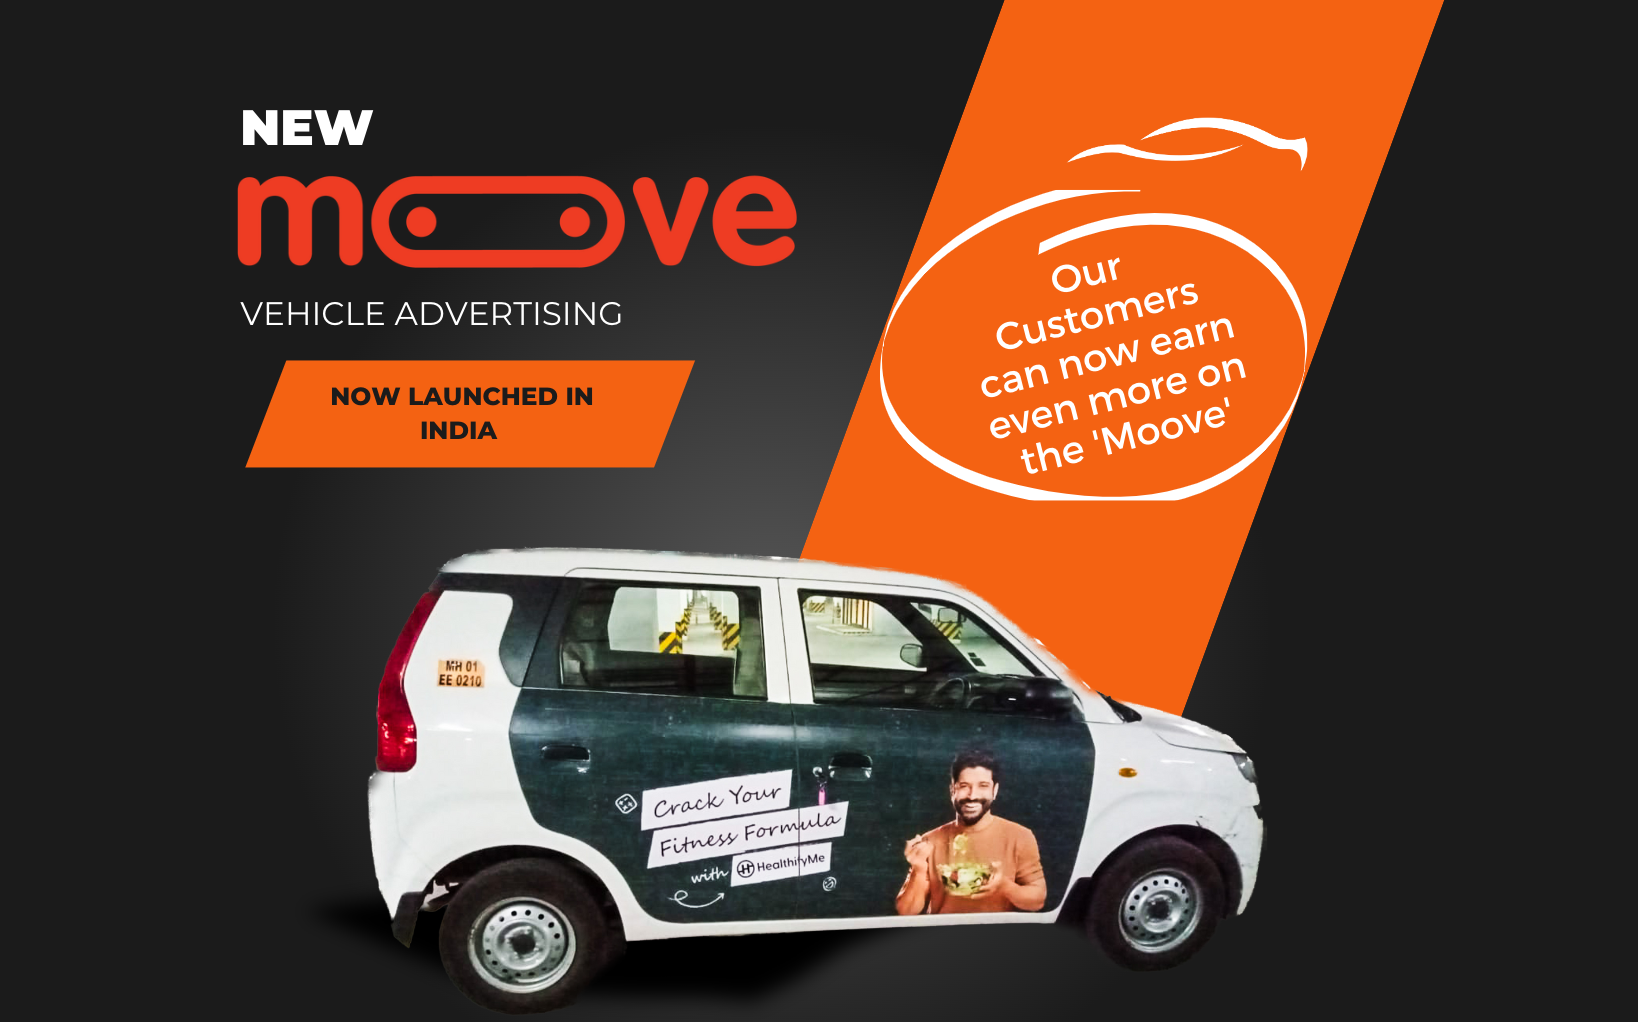 Moove launches Vehicle Advertising in India